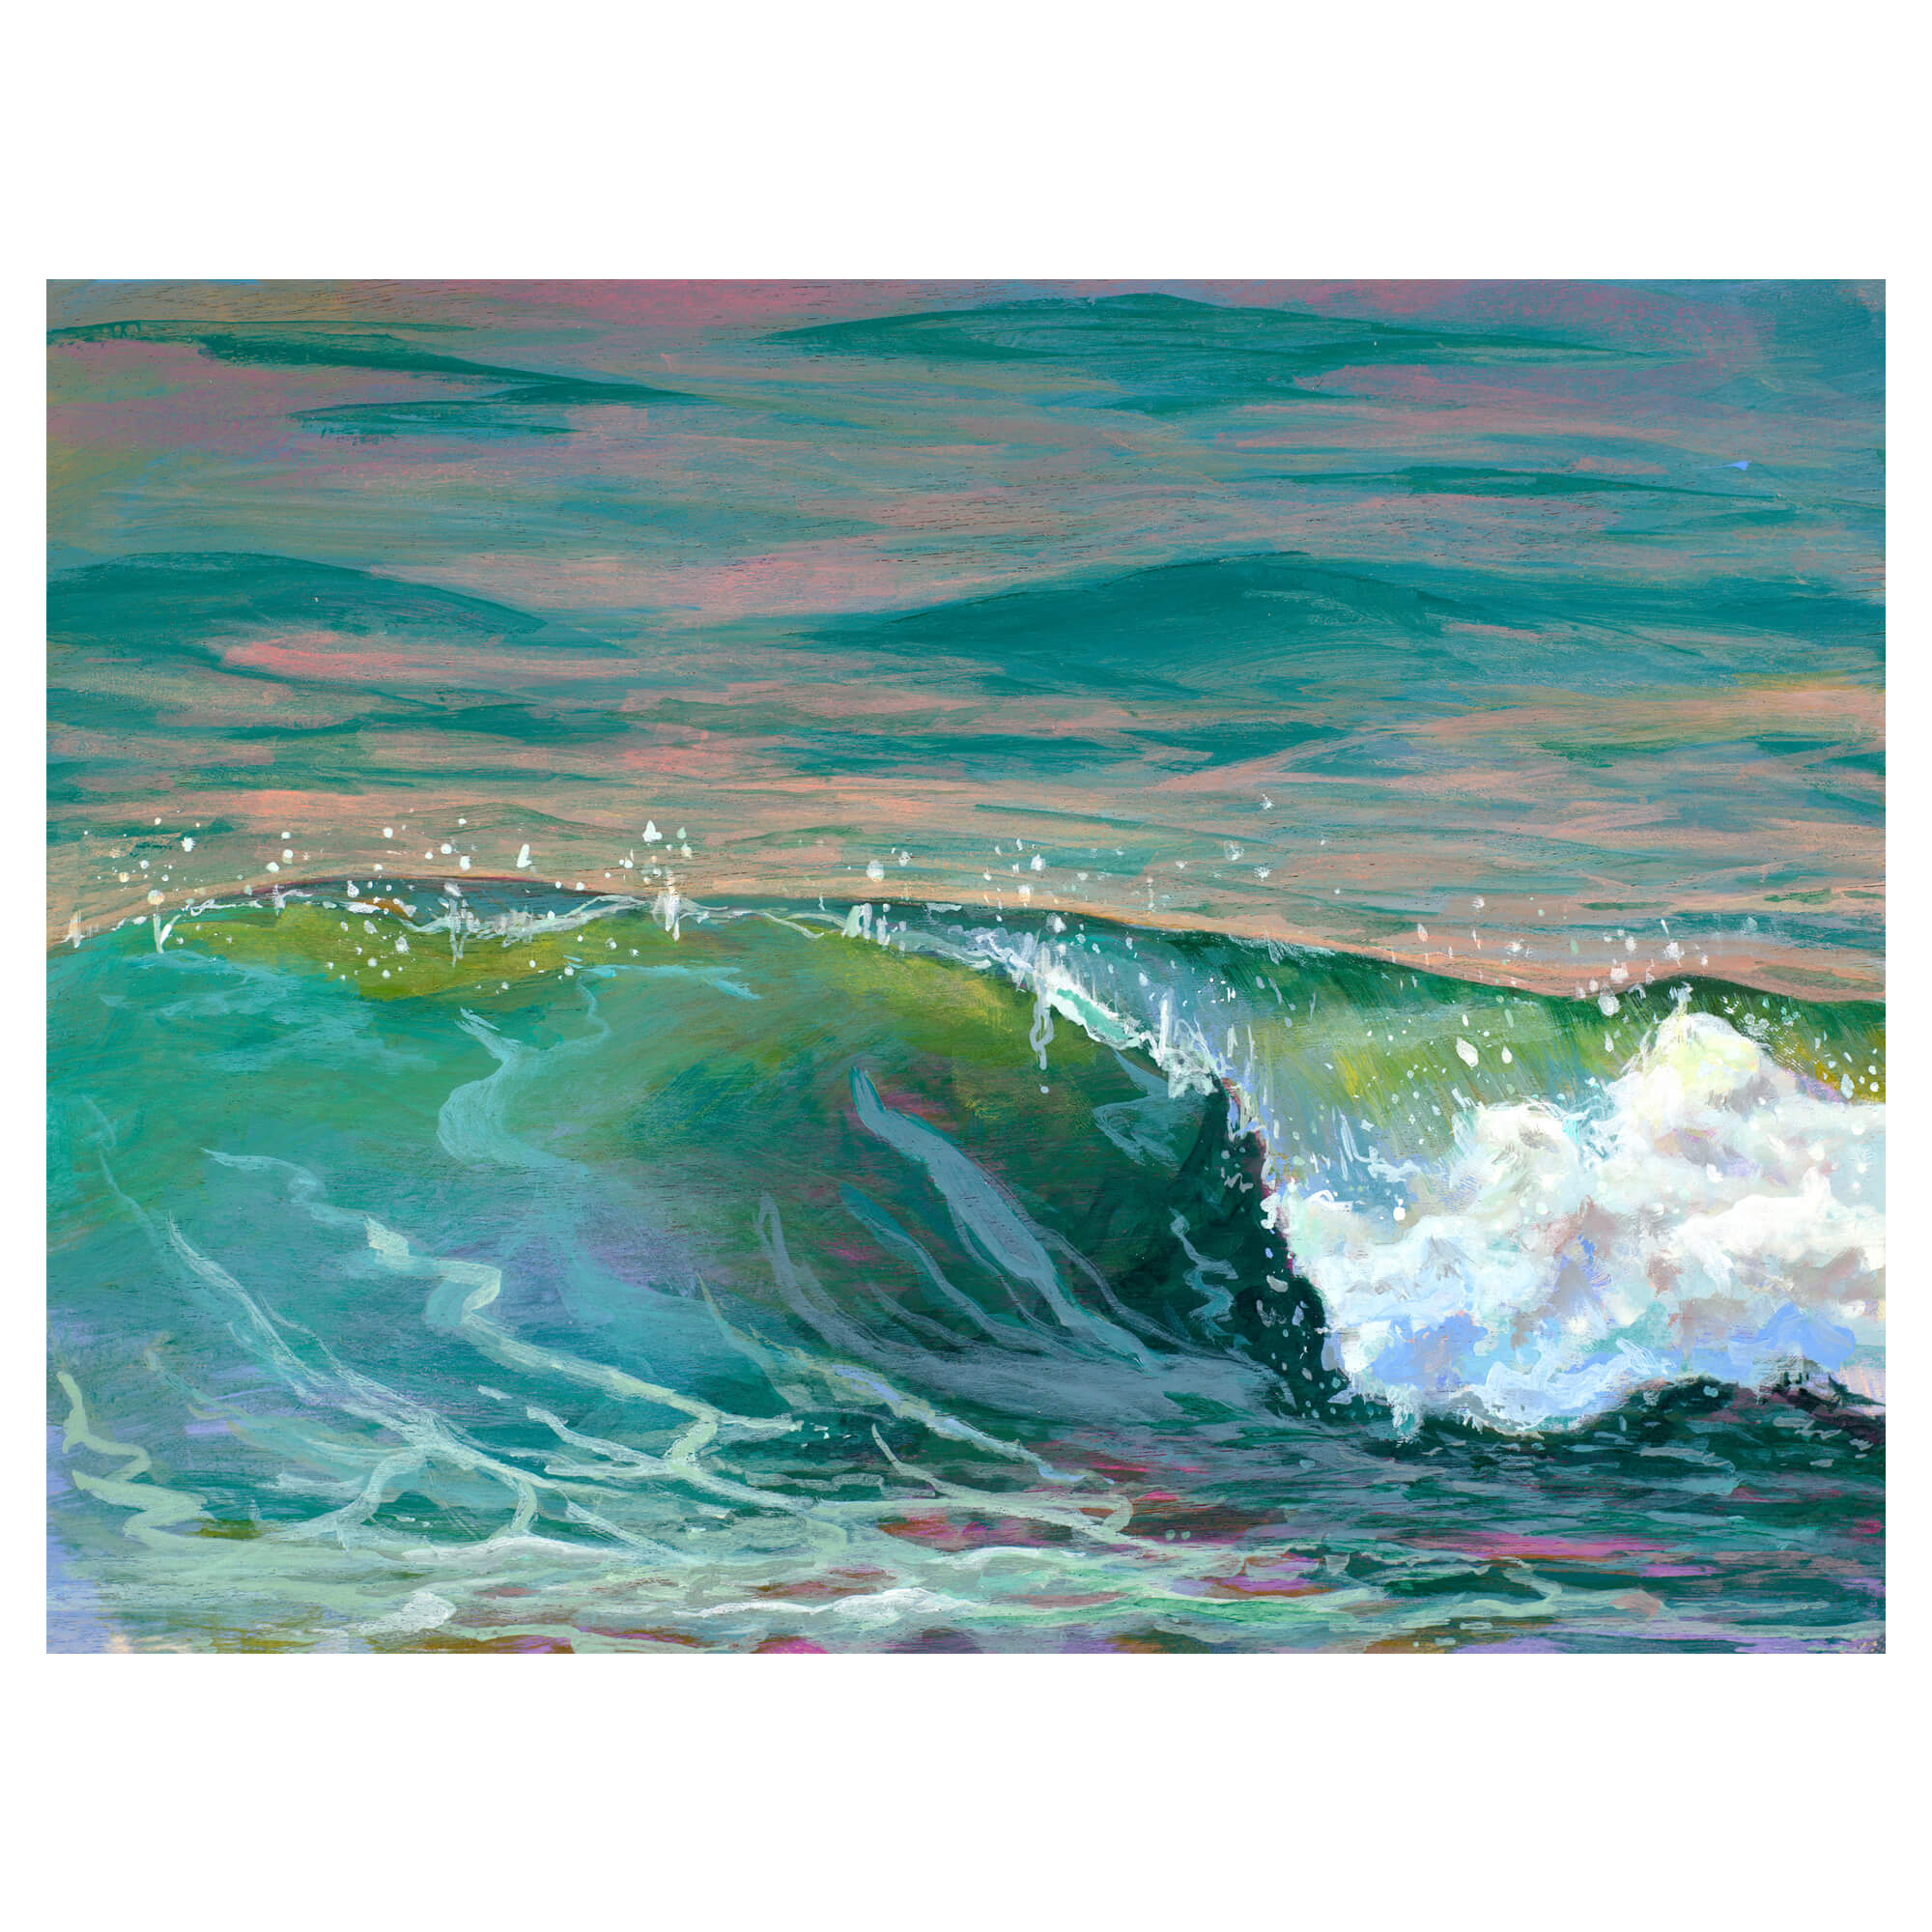 A teal wave with a touch of yellow and pink by Hawaii artist Lindsay Wilkins